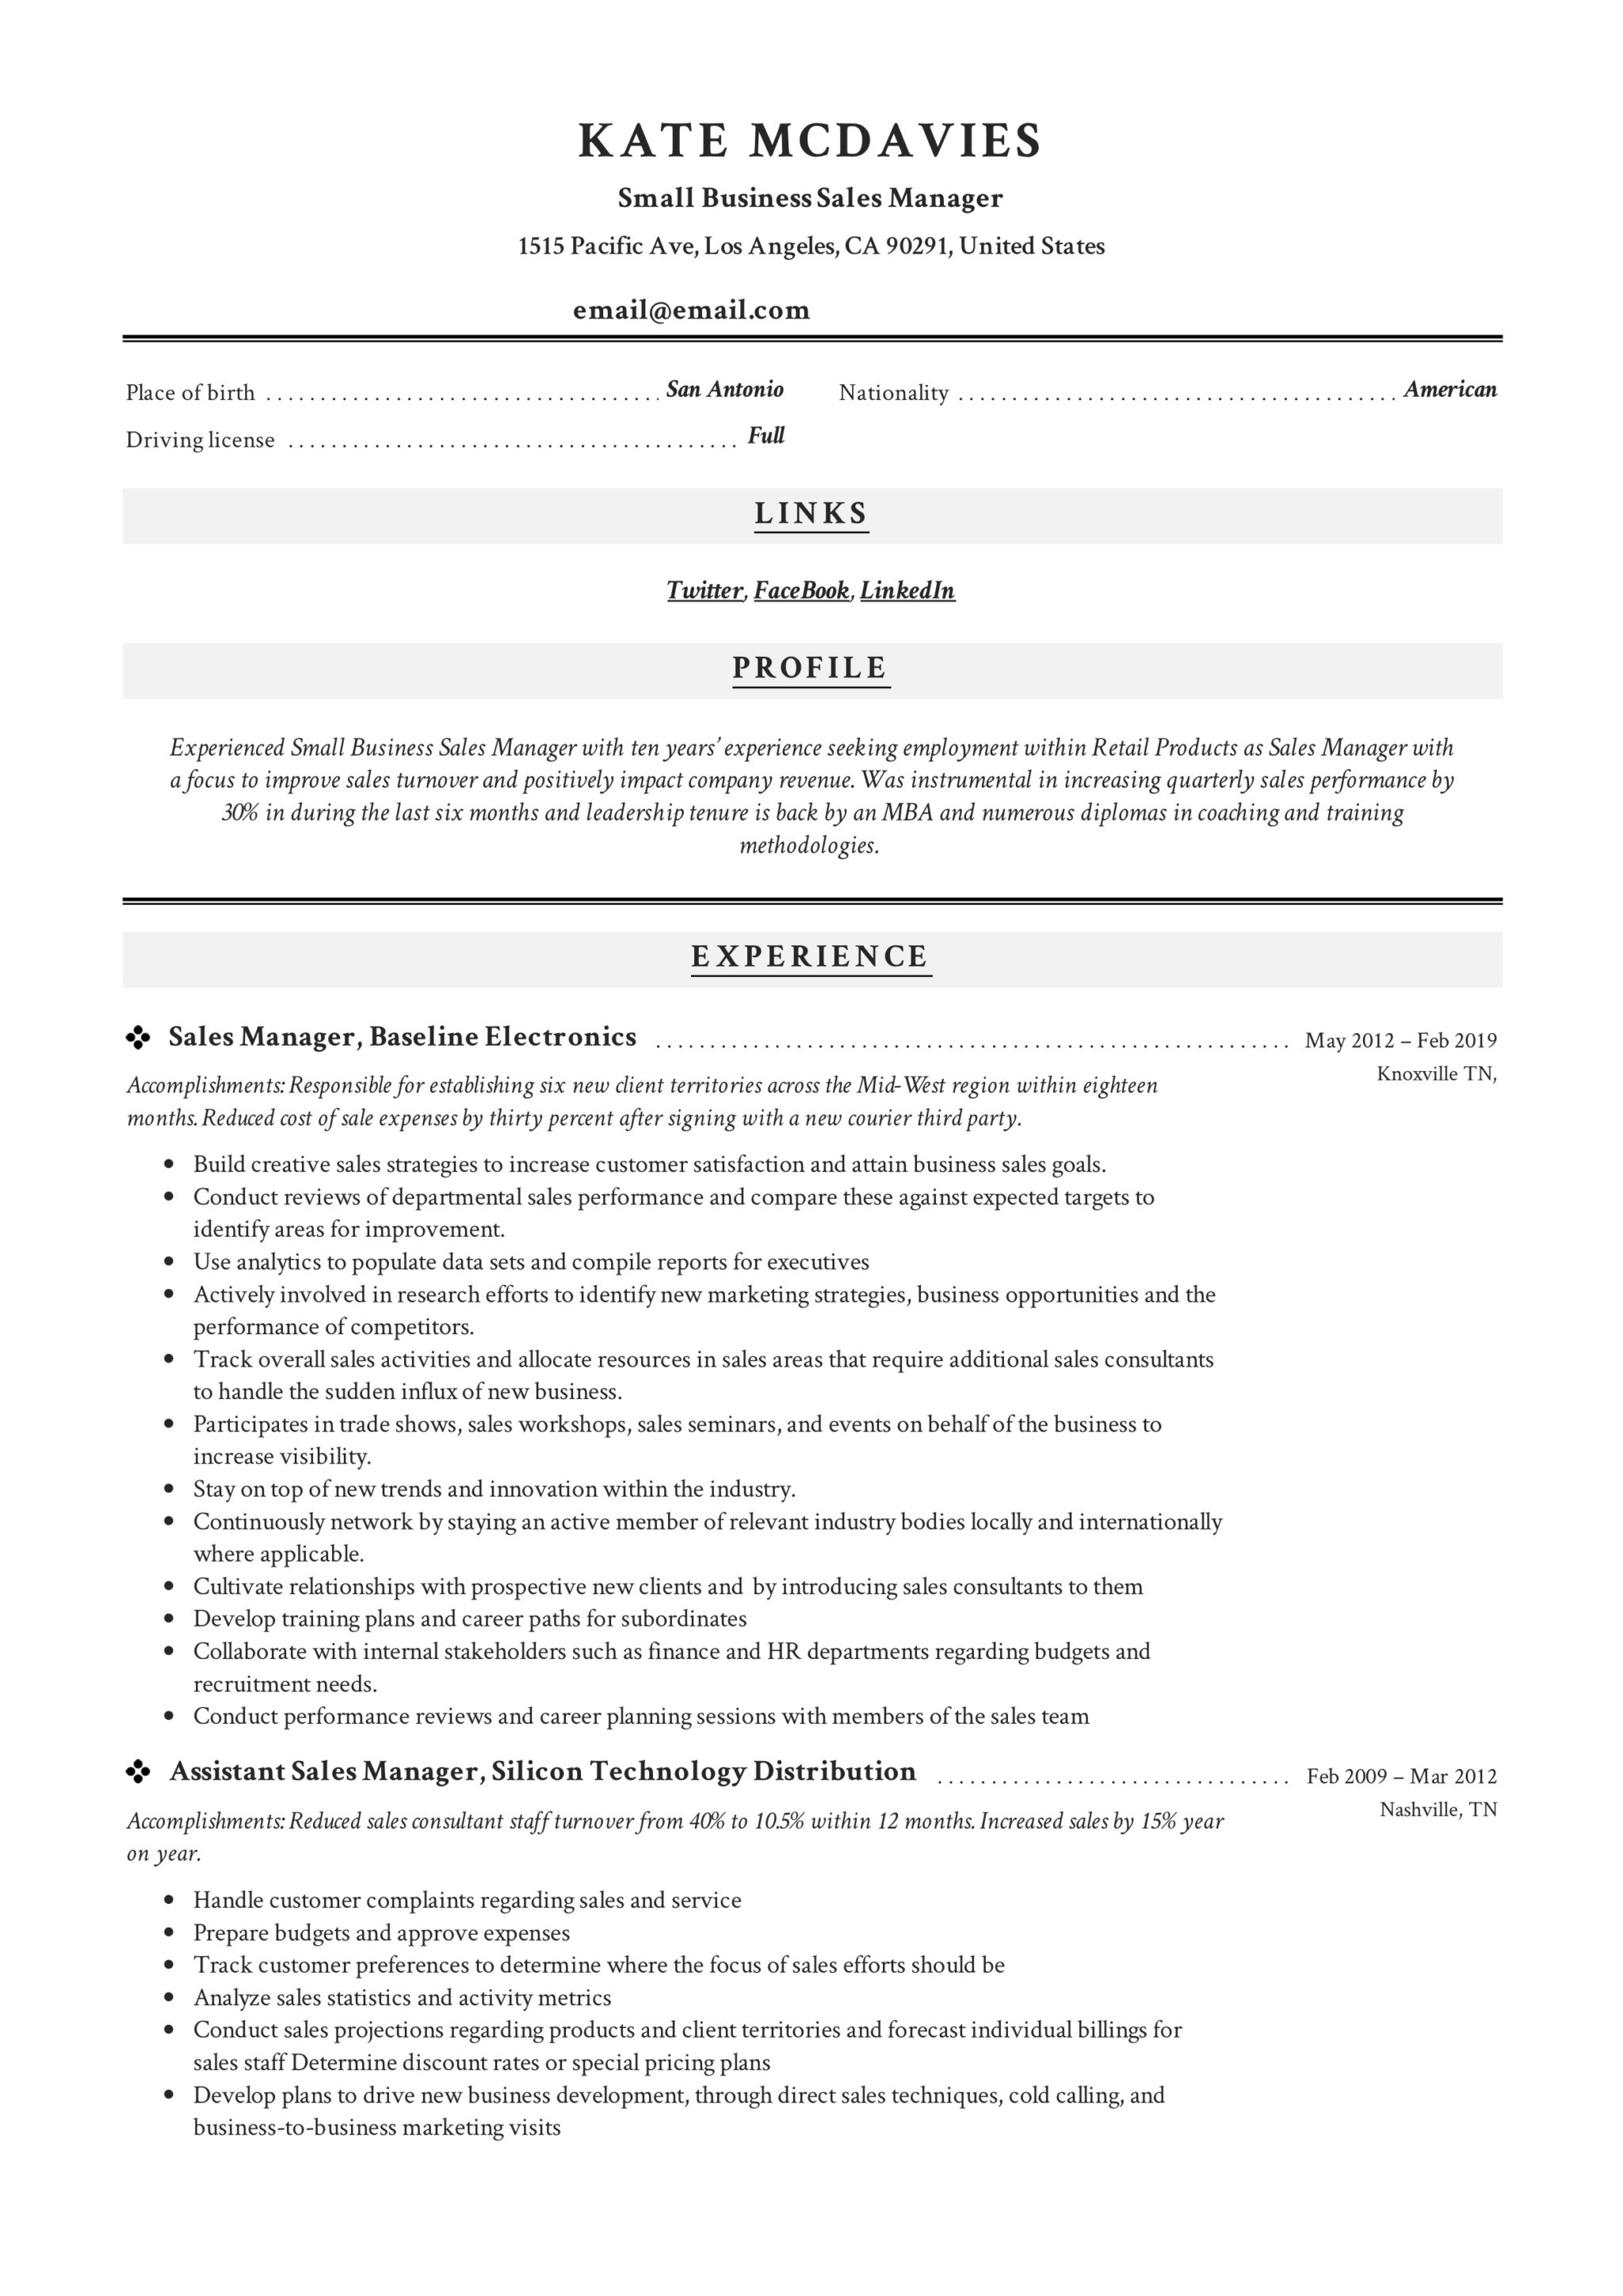 Small Business Sales Manager Resume Example (3)